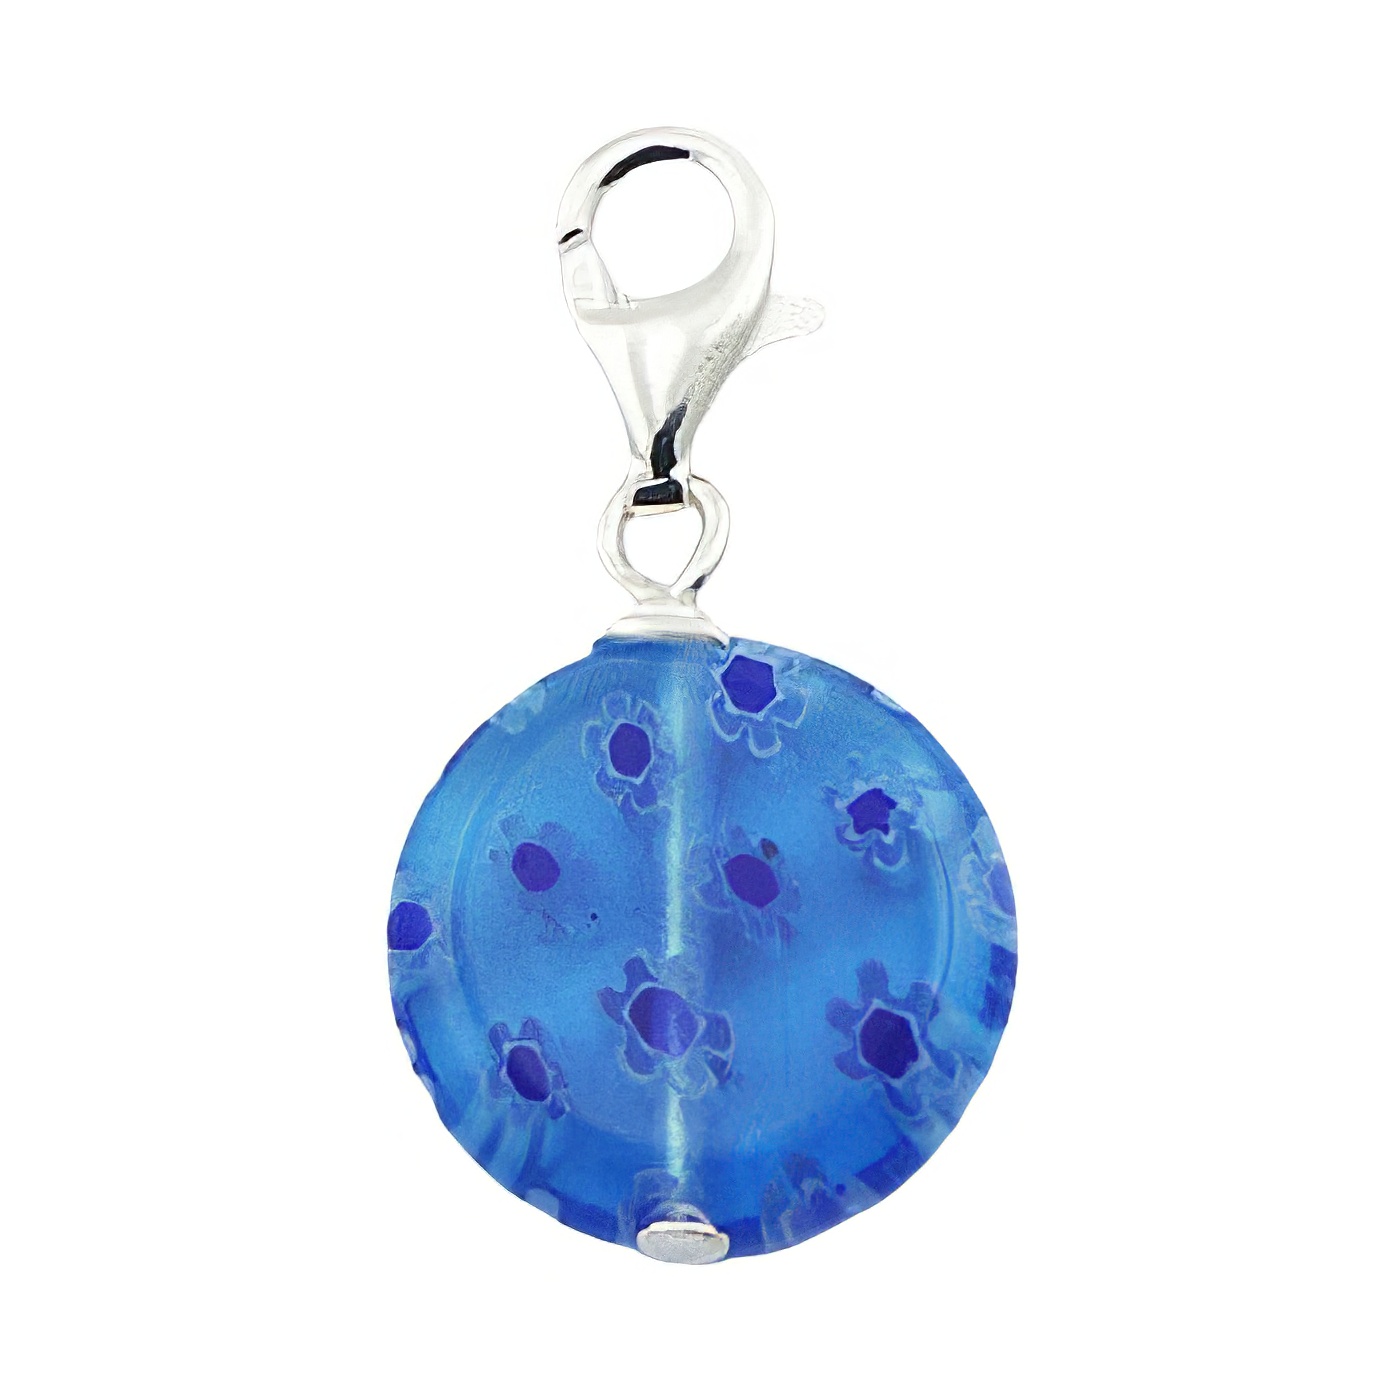 Murano glass blue disc with dark blue flowers sterling silver charm by BeYindi 